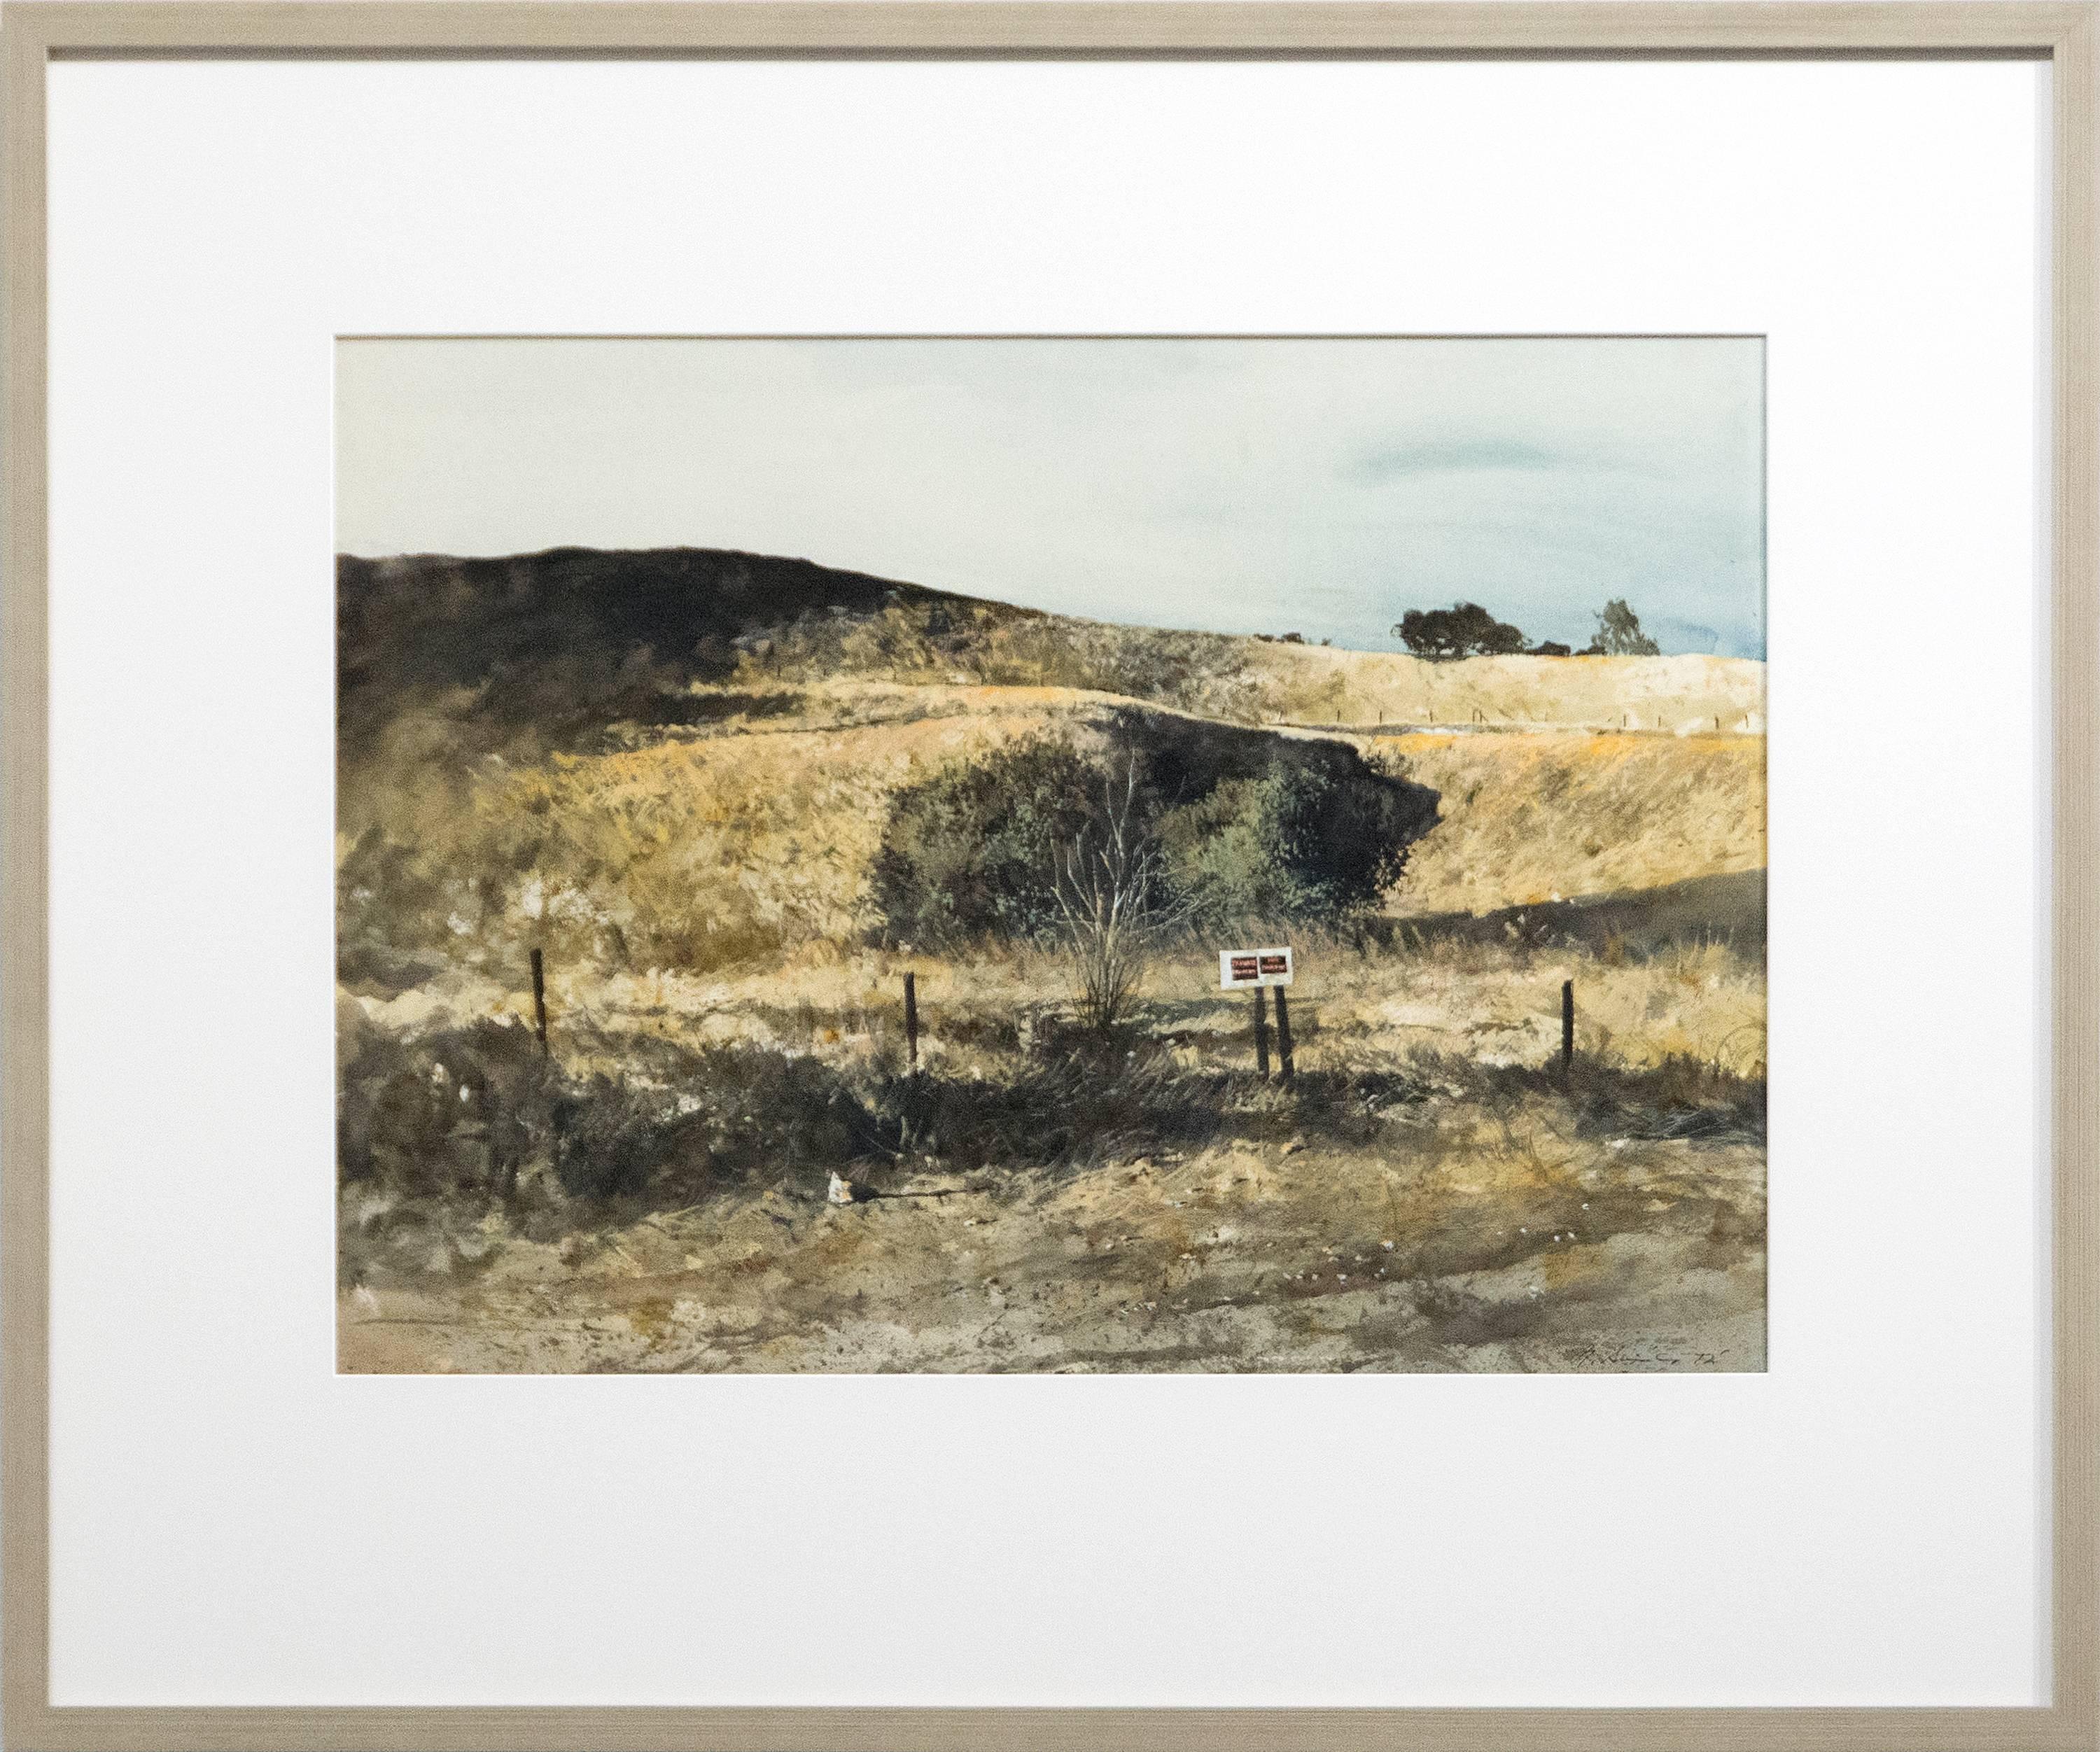 Distant Shade, Knights Ferry, CA - Art by Gregory Sumida